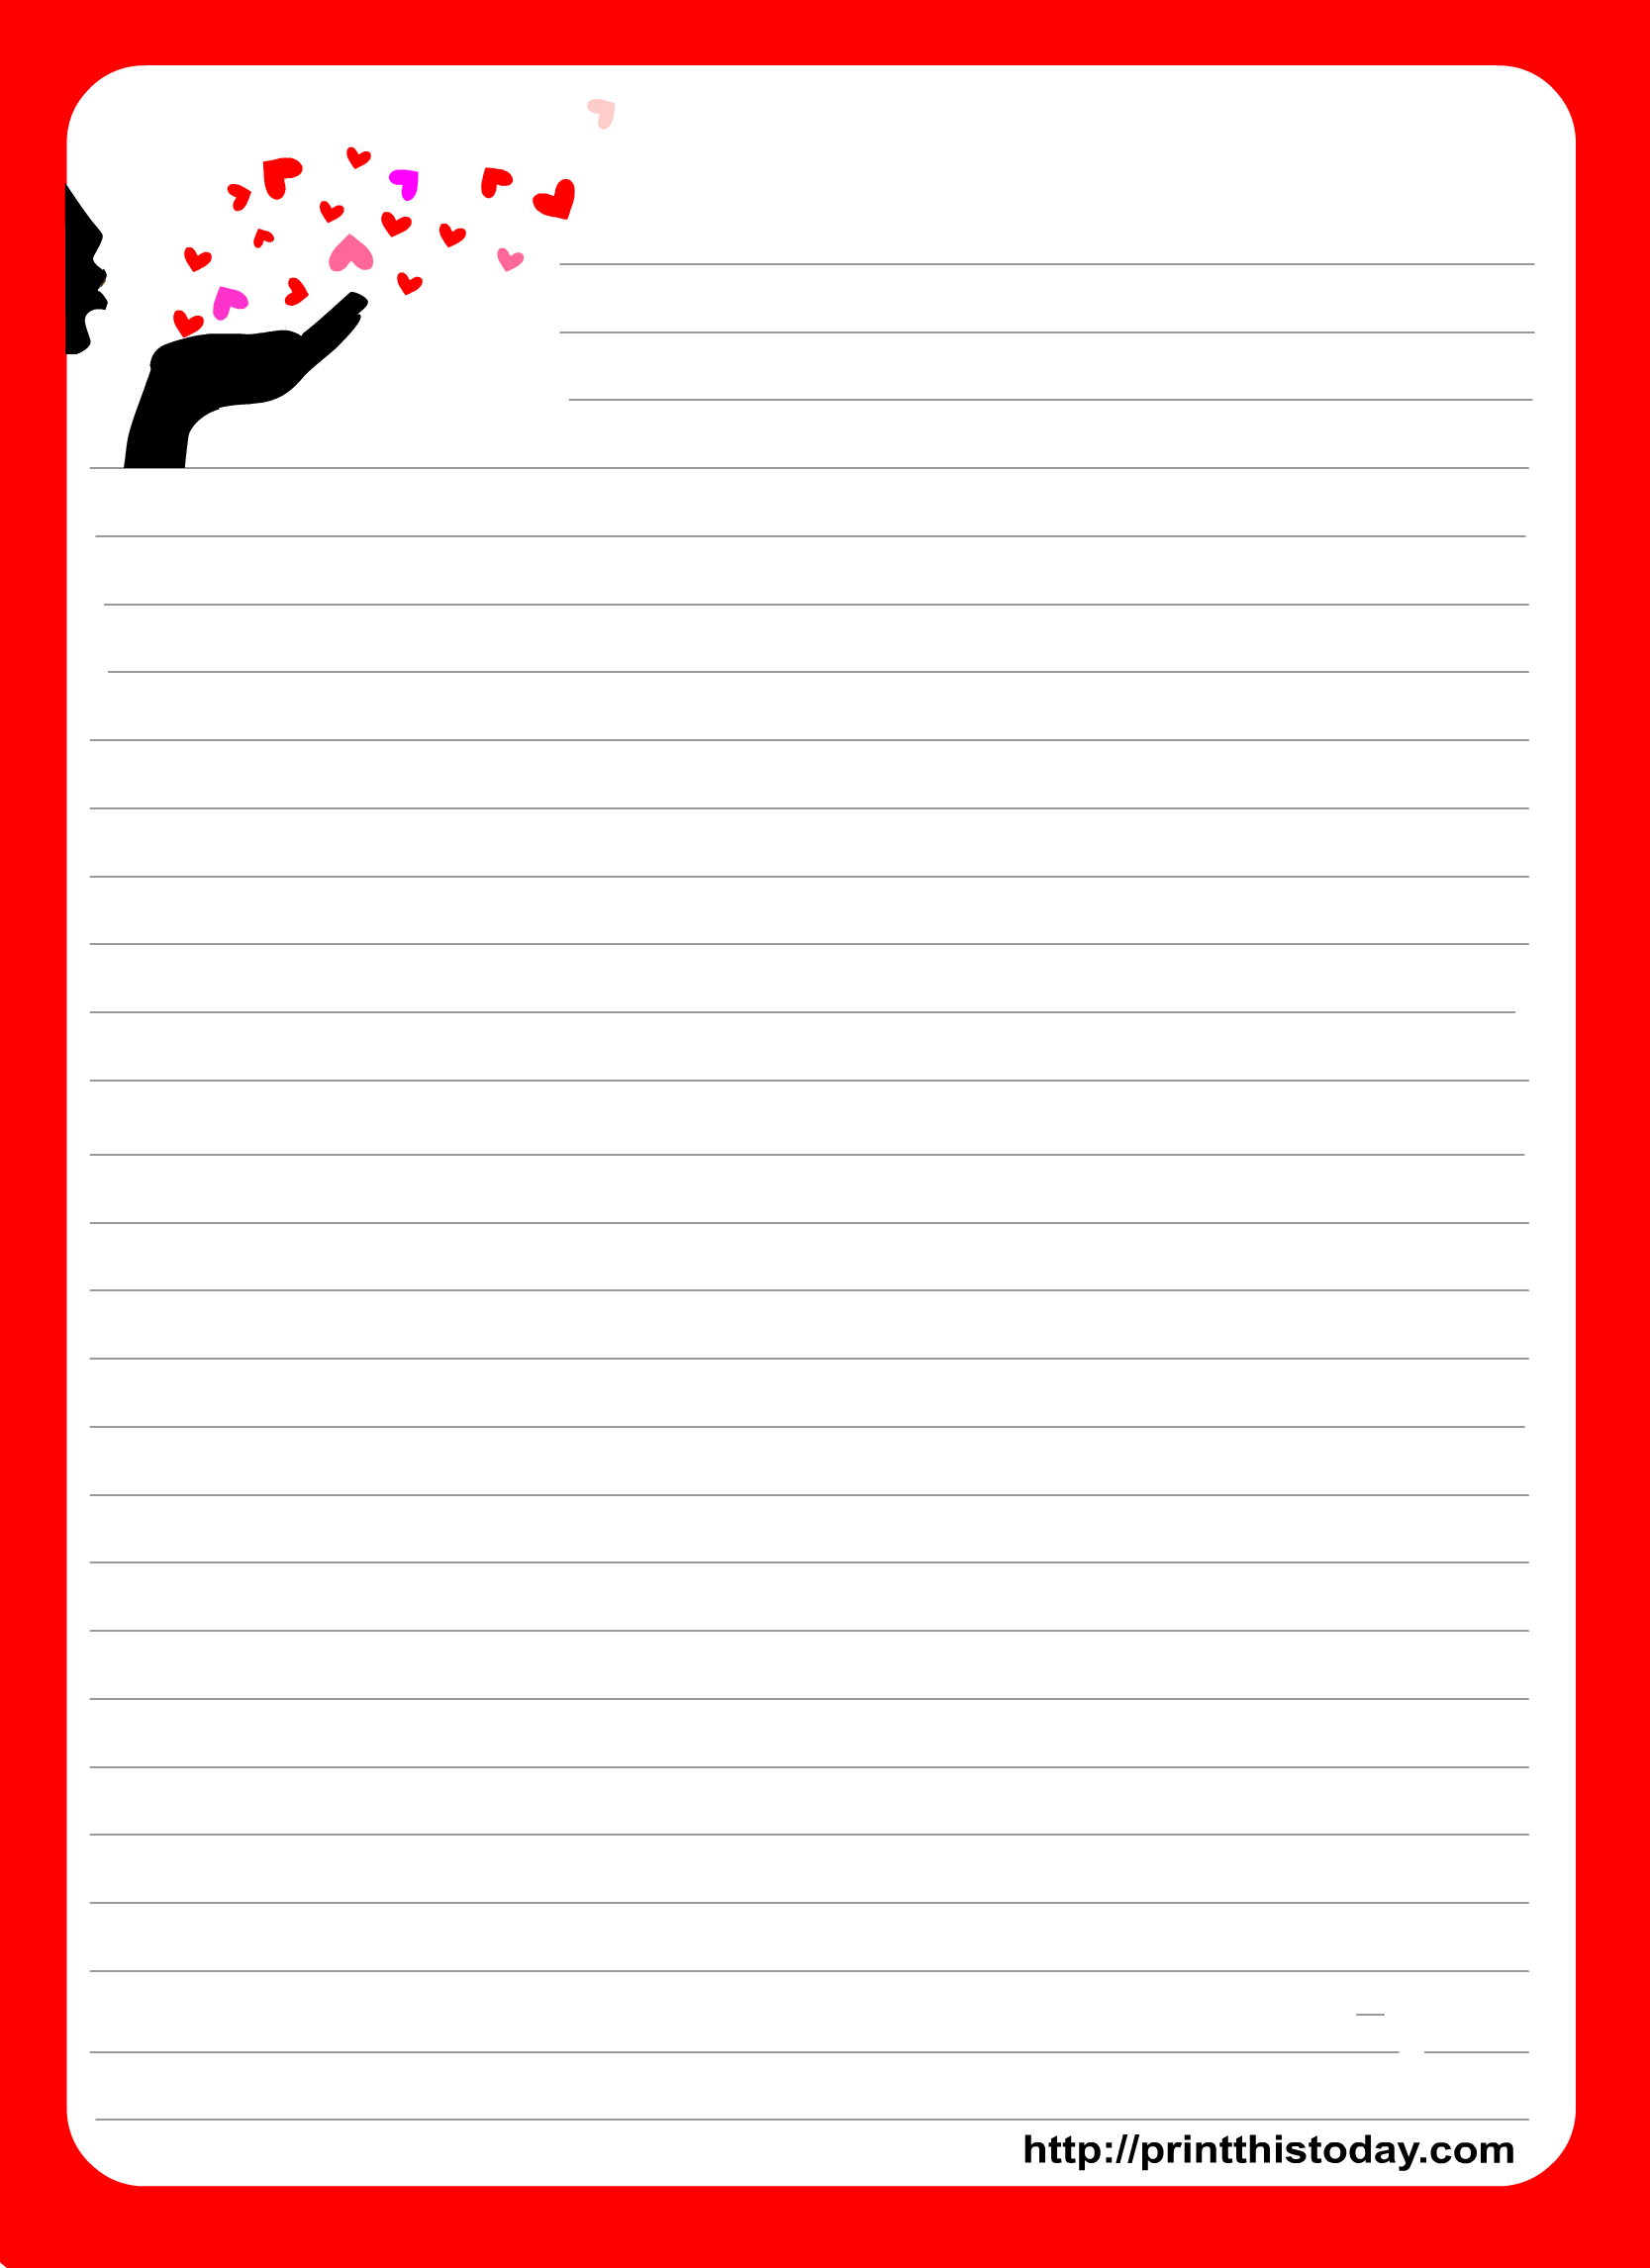 This Is An Adorable Love Letter Pad Stationery Design Which Has - Free Printable Love Letter Paper